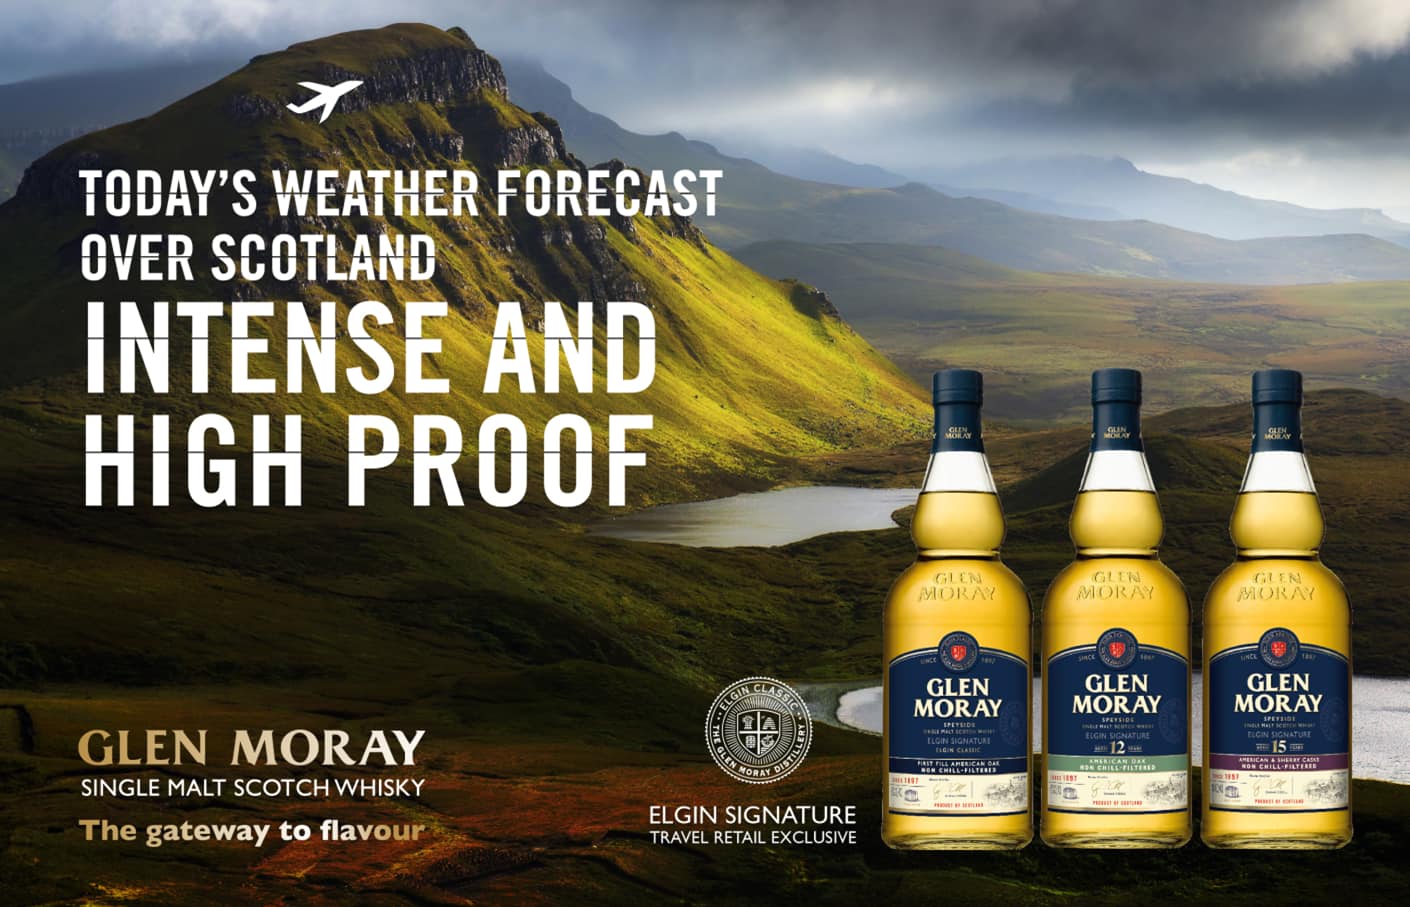 Speyside distillery Glen Moray has introduced a new range to the travel retail channel, including a no-age-statement, 12-year-old and 15-year-old Scotch whisky.